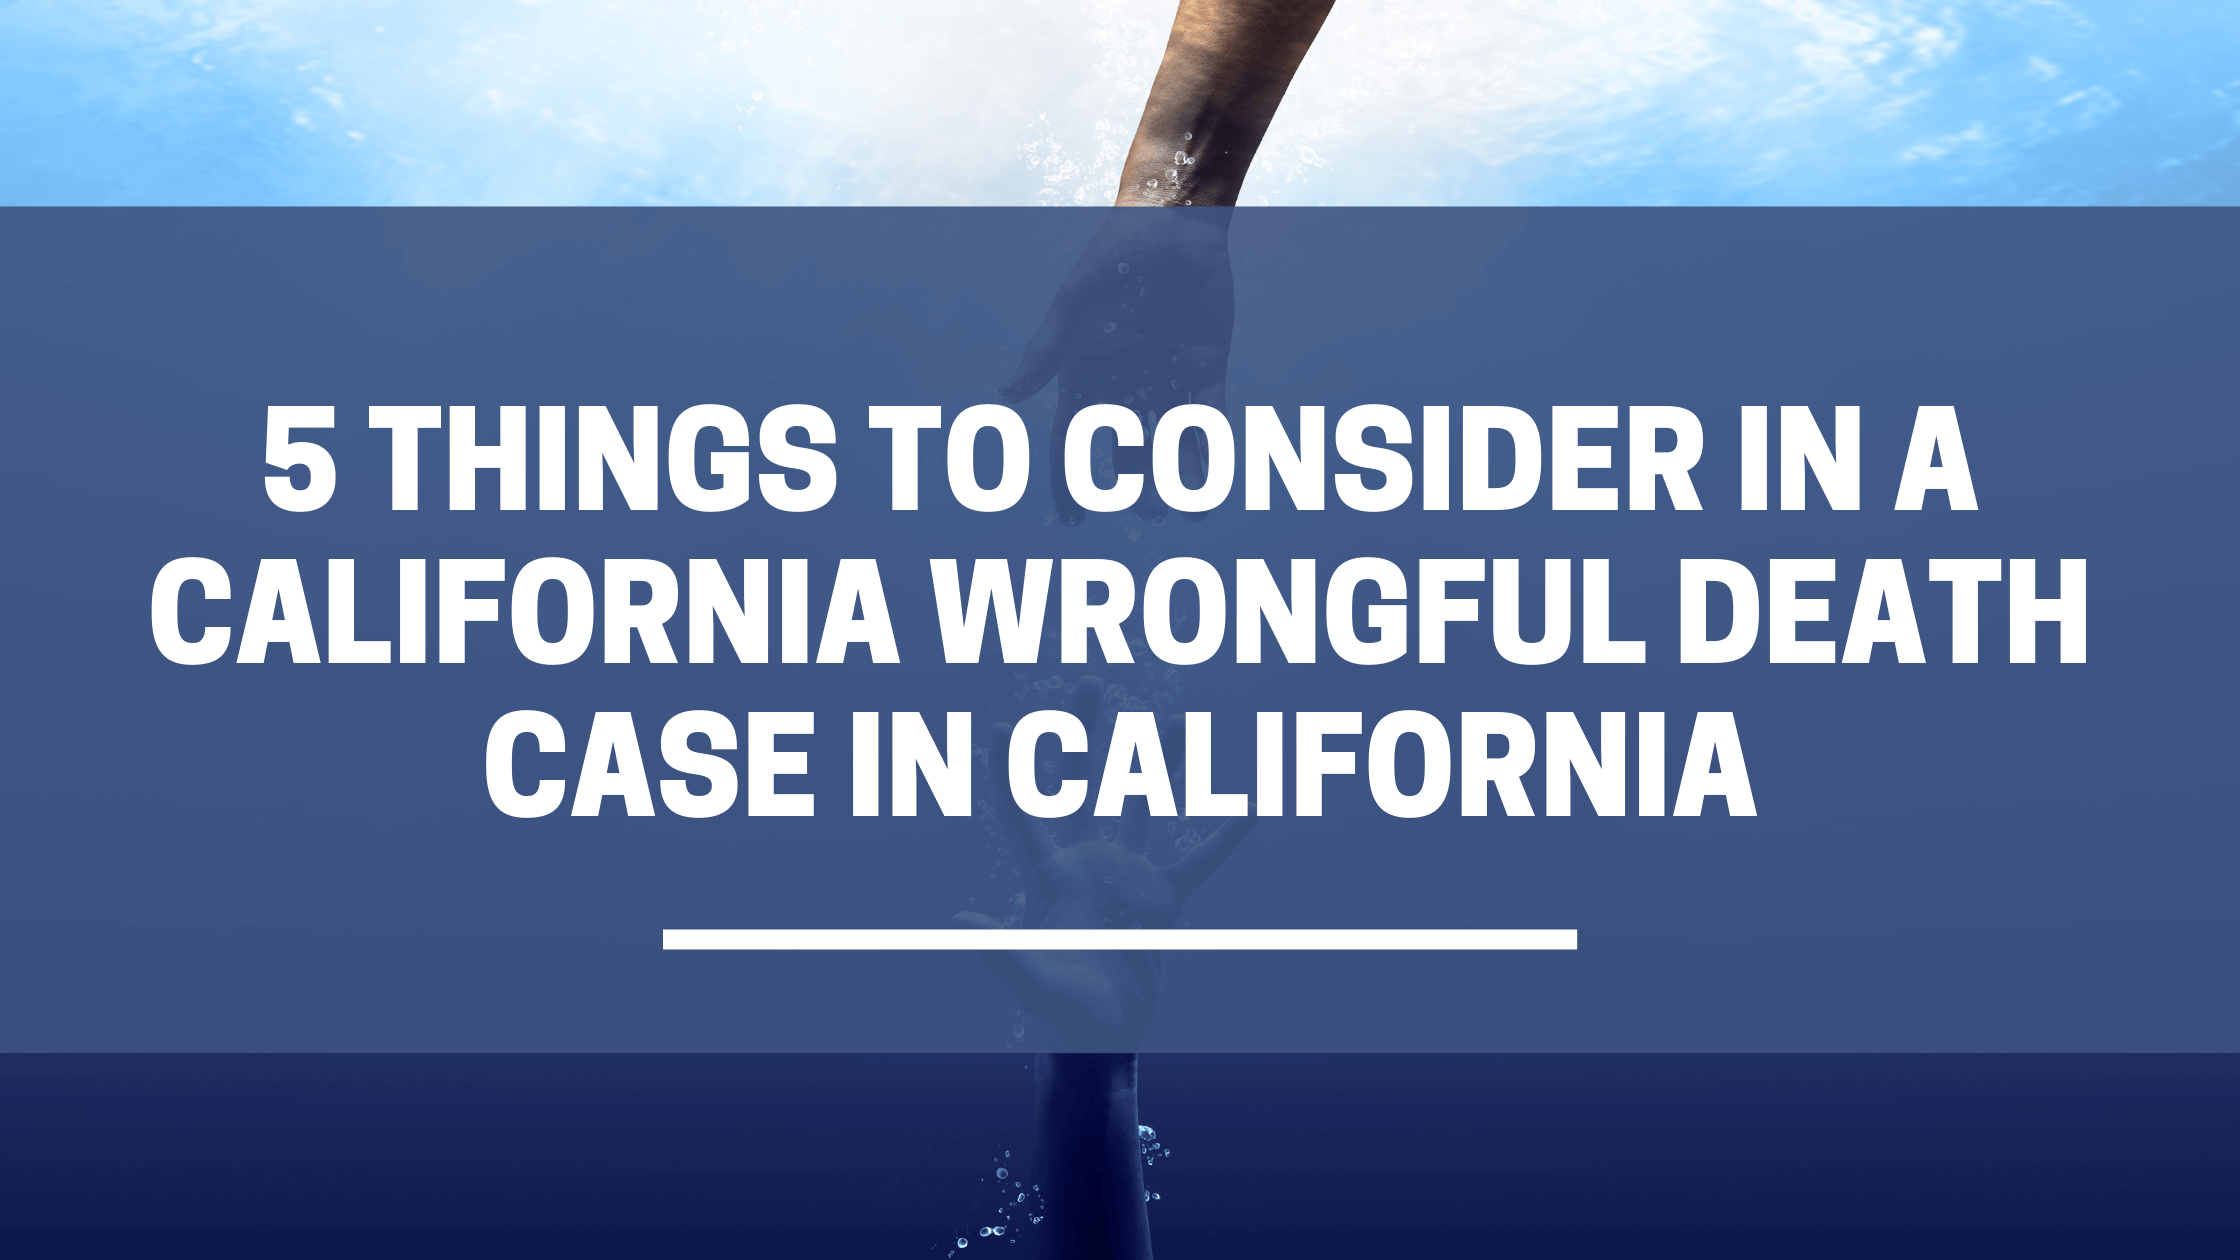 California Wrongful Death Case - 5 Things To Consider